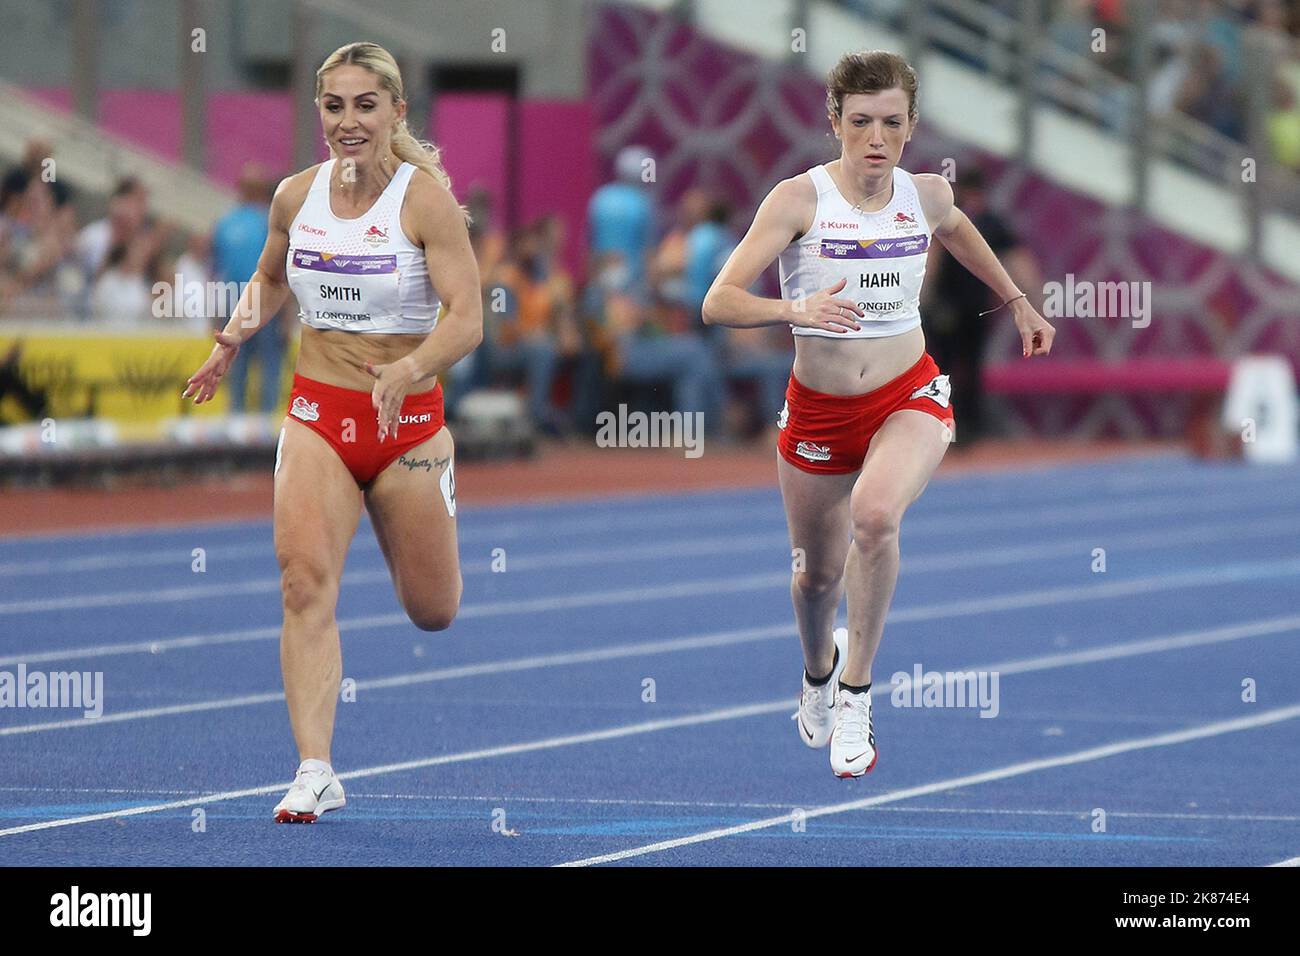 (L to R) Ali SMITH & Sophie HAHN of England in the Women's T37 / T38 100m at the 2022 Commonwealth games in Birmingham. Stock Photo